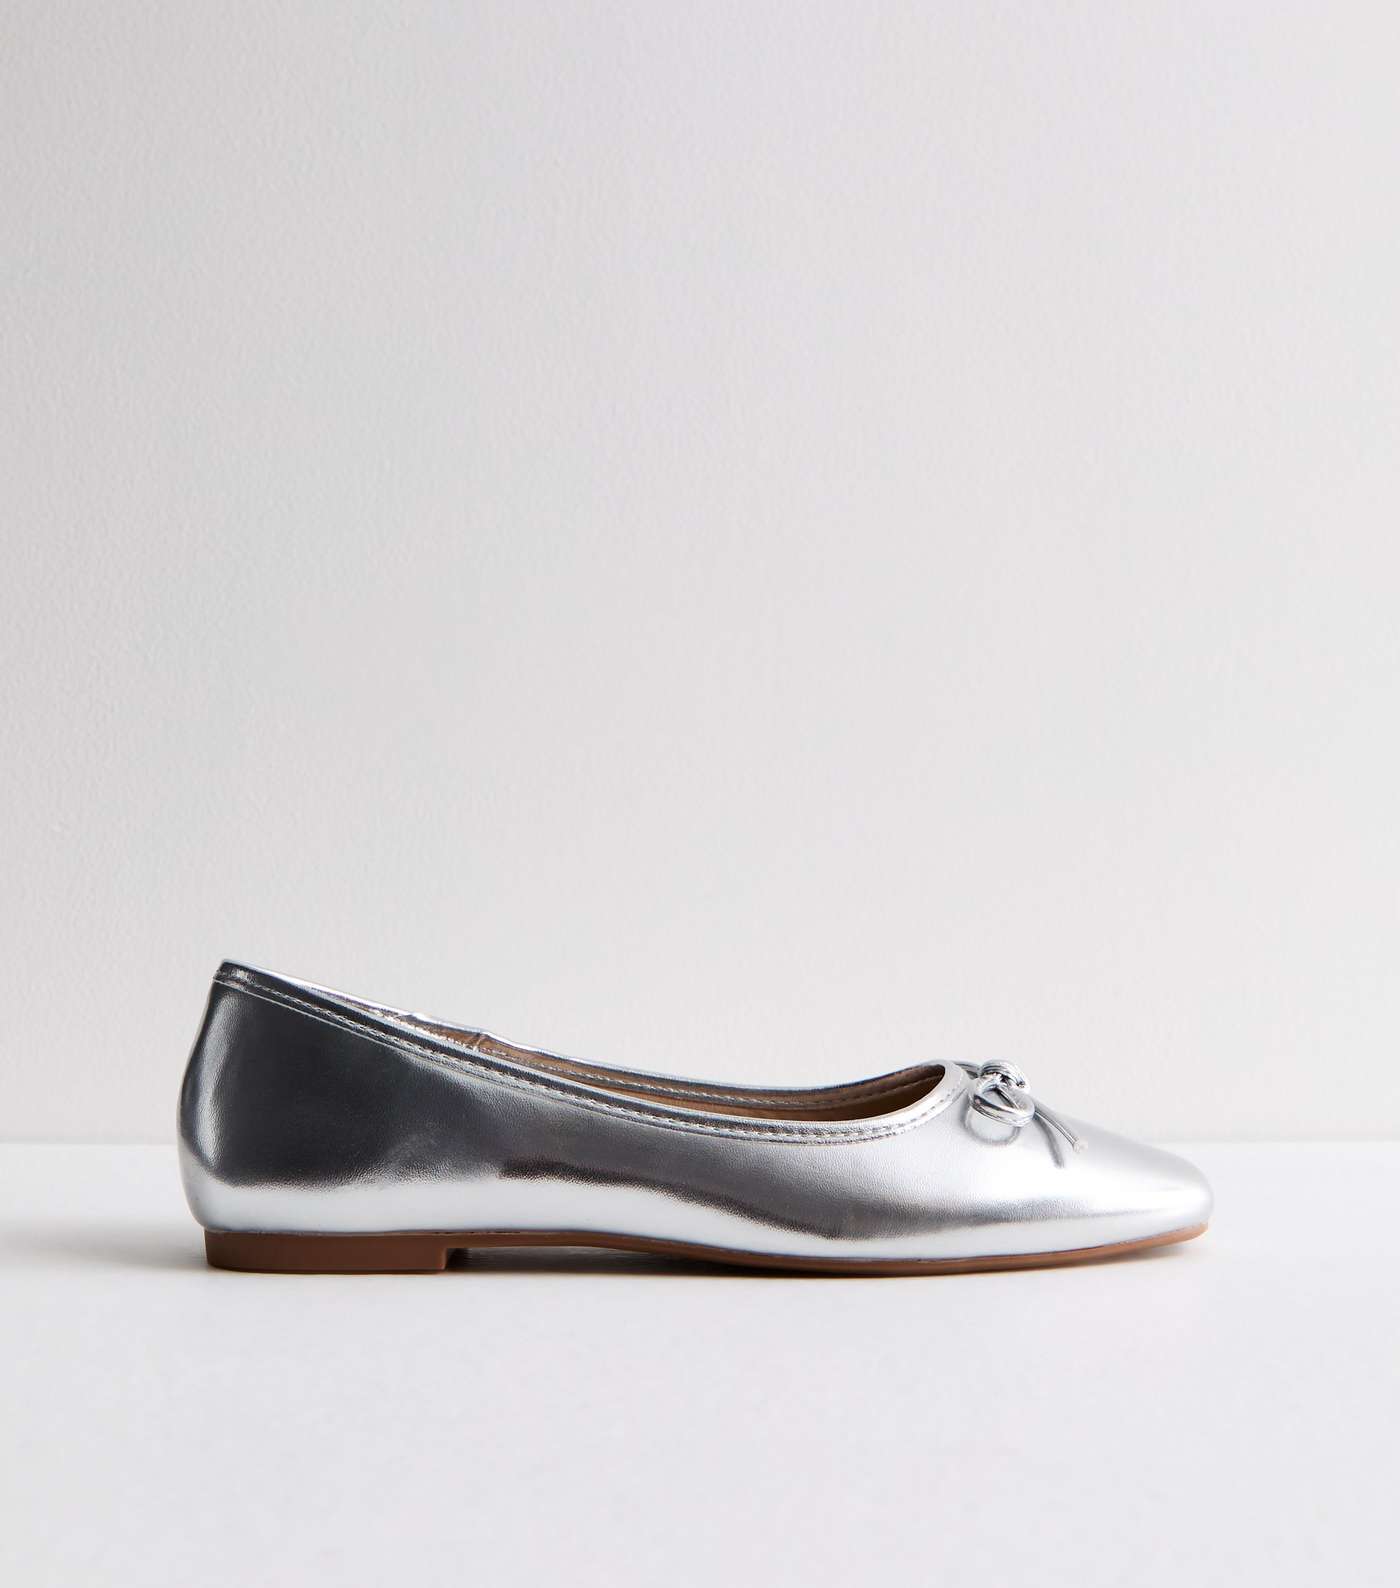 Truffle Silver Leather-Look Bow Ballerina Pumps Image 5